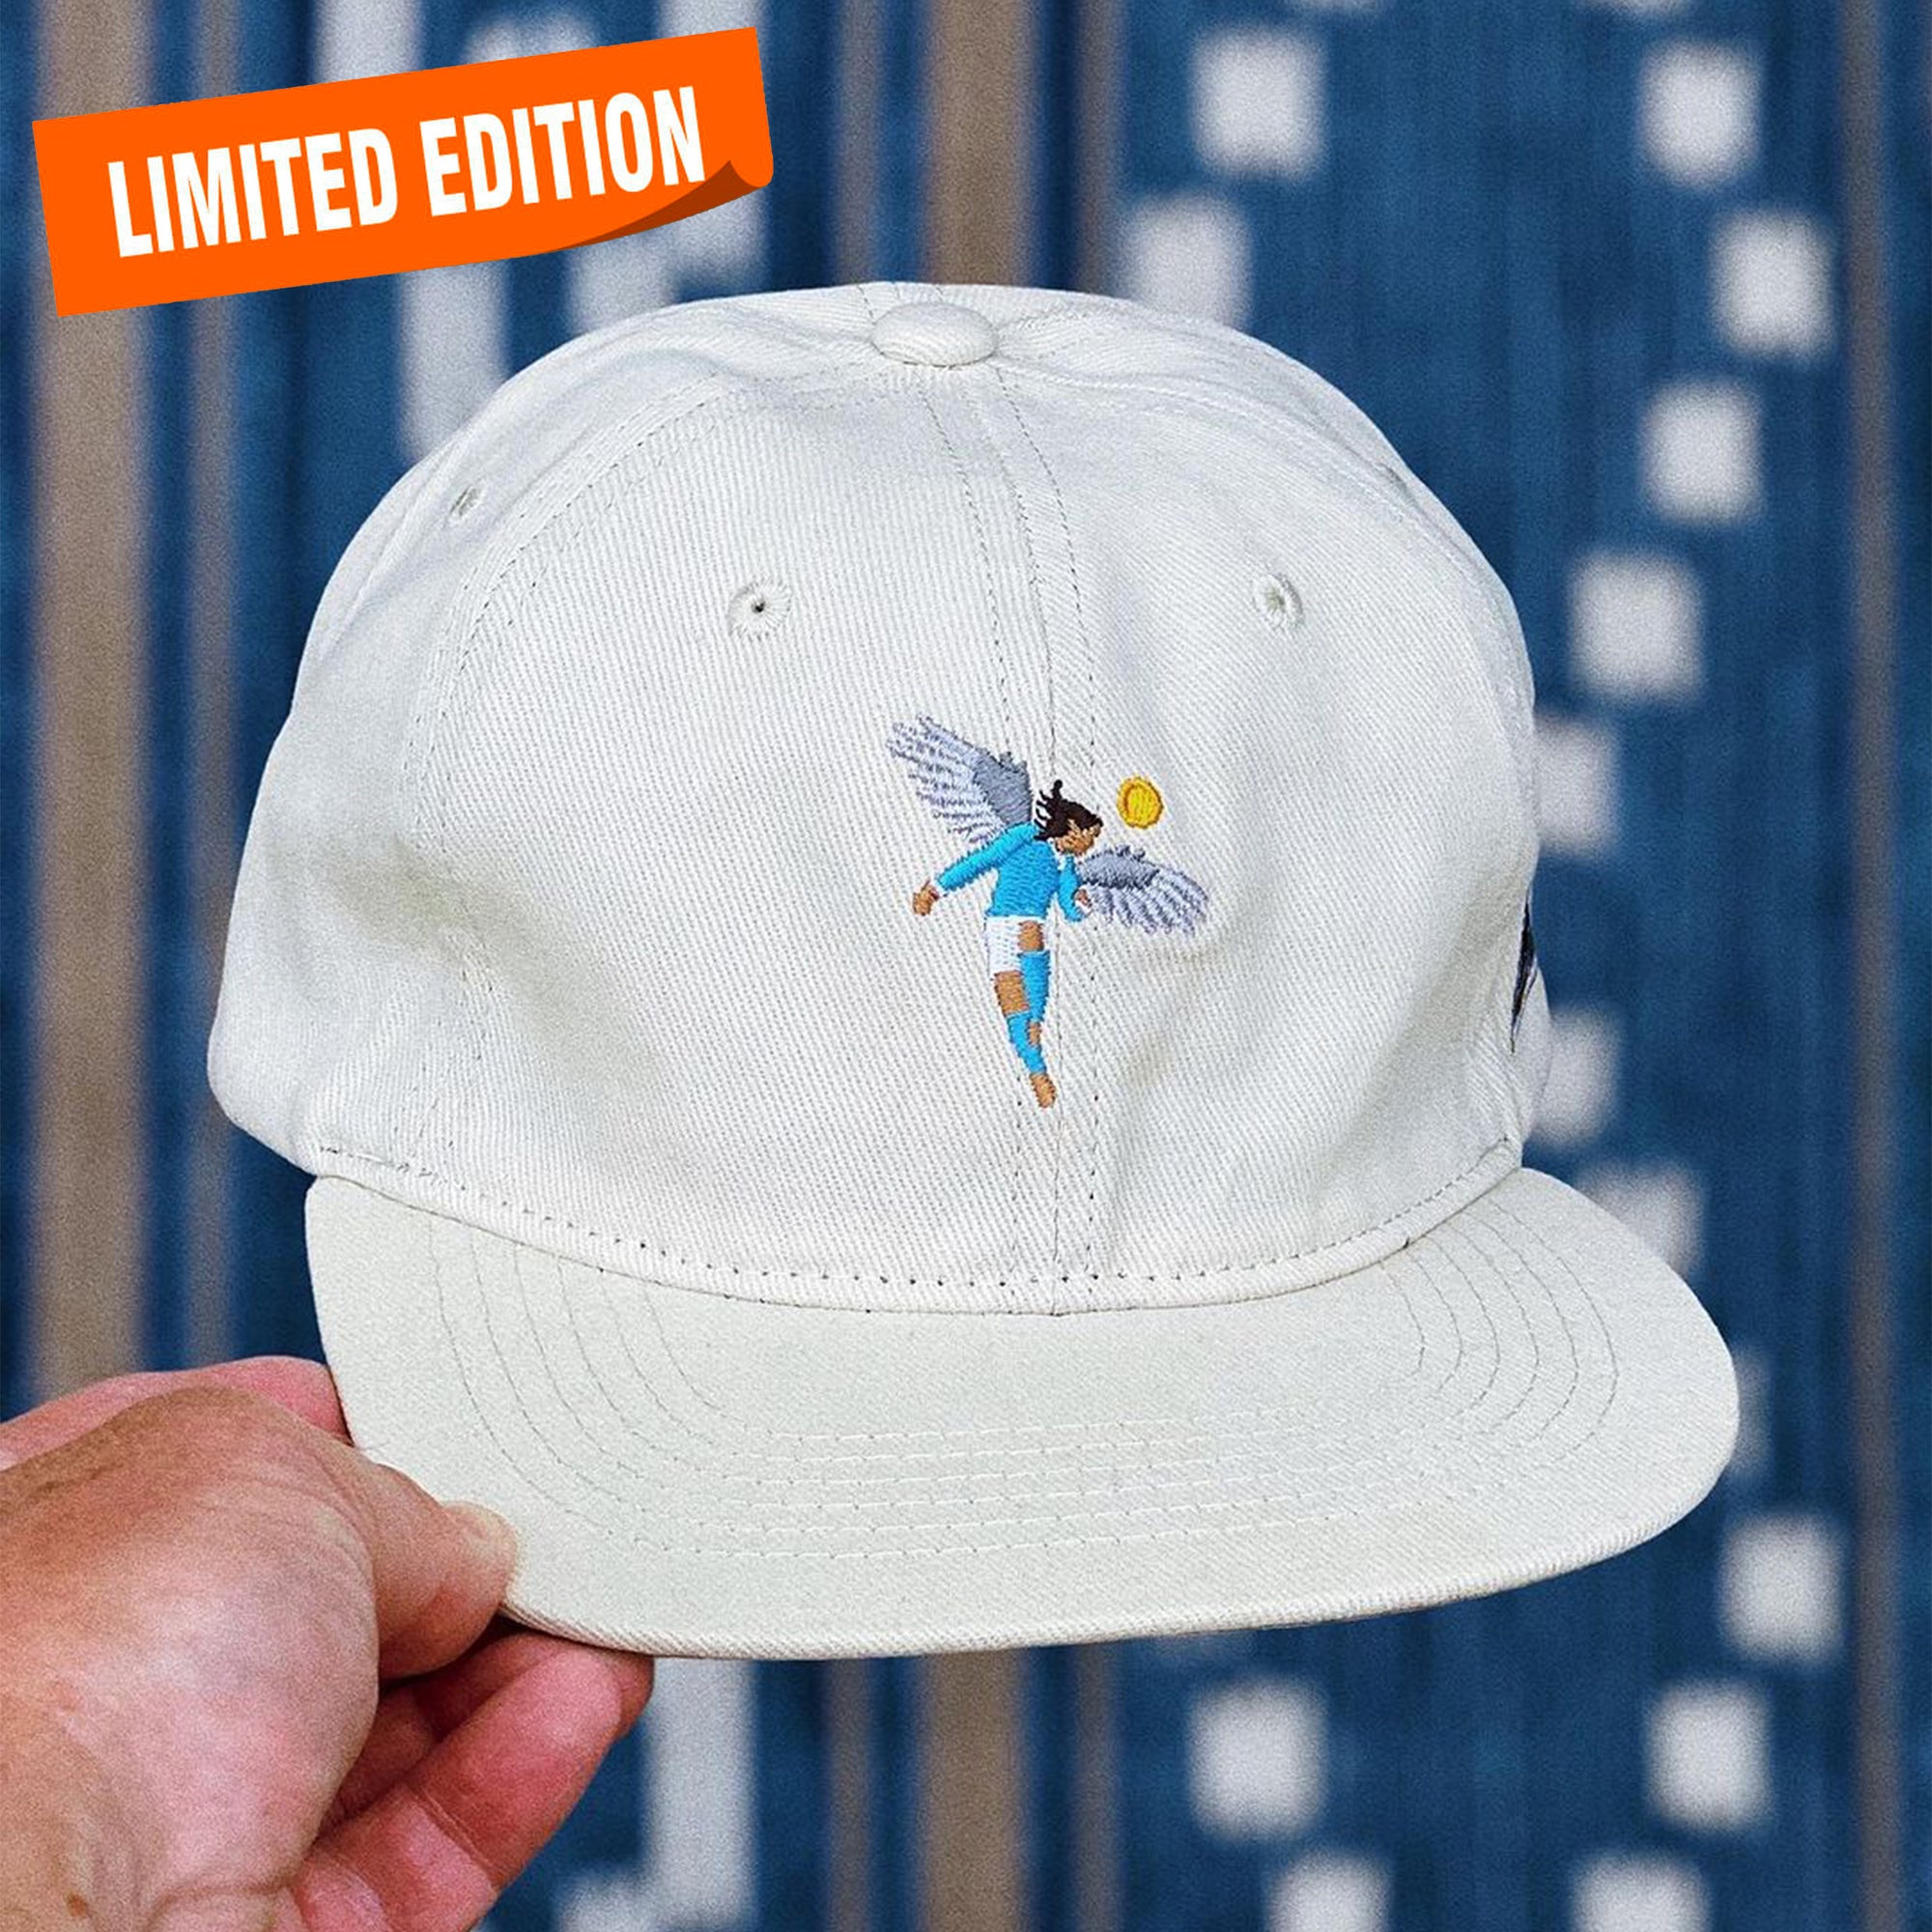 25 LIMITED EDITION Icarus Cup Hats by Talisman